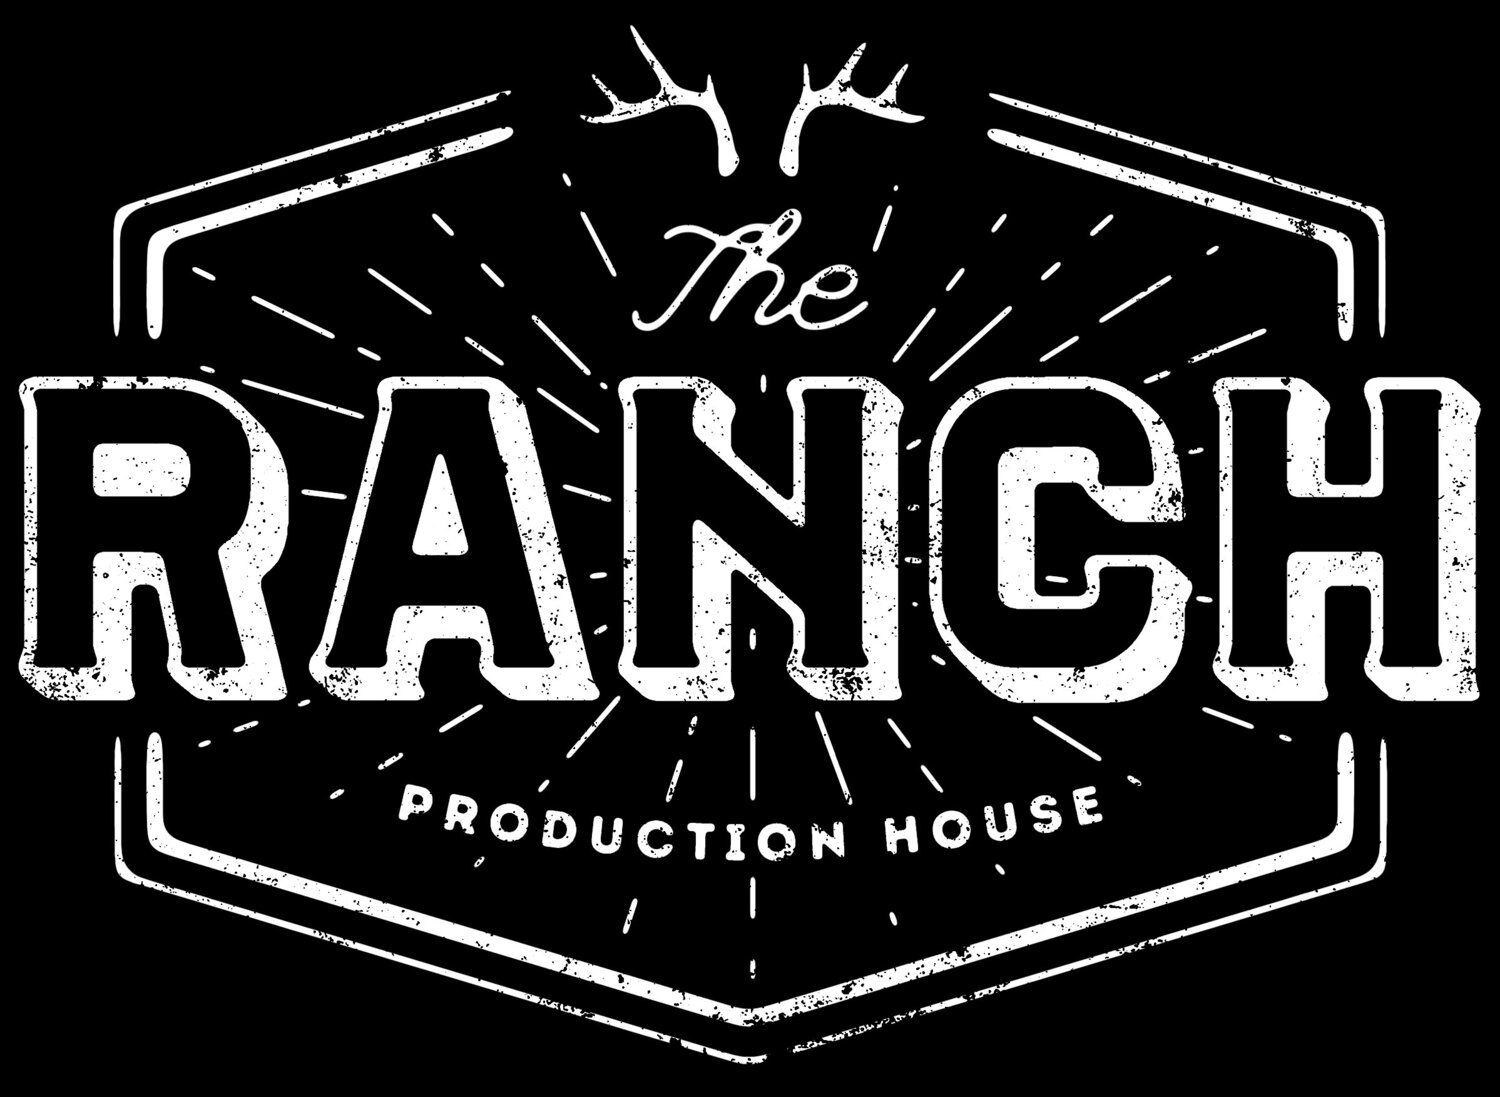 The Ranch Production House